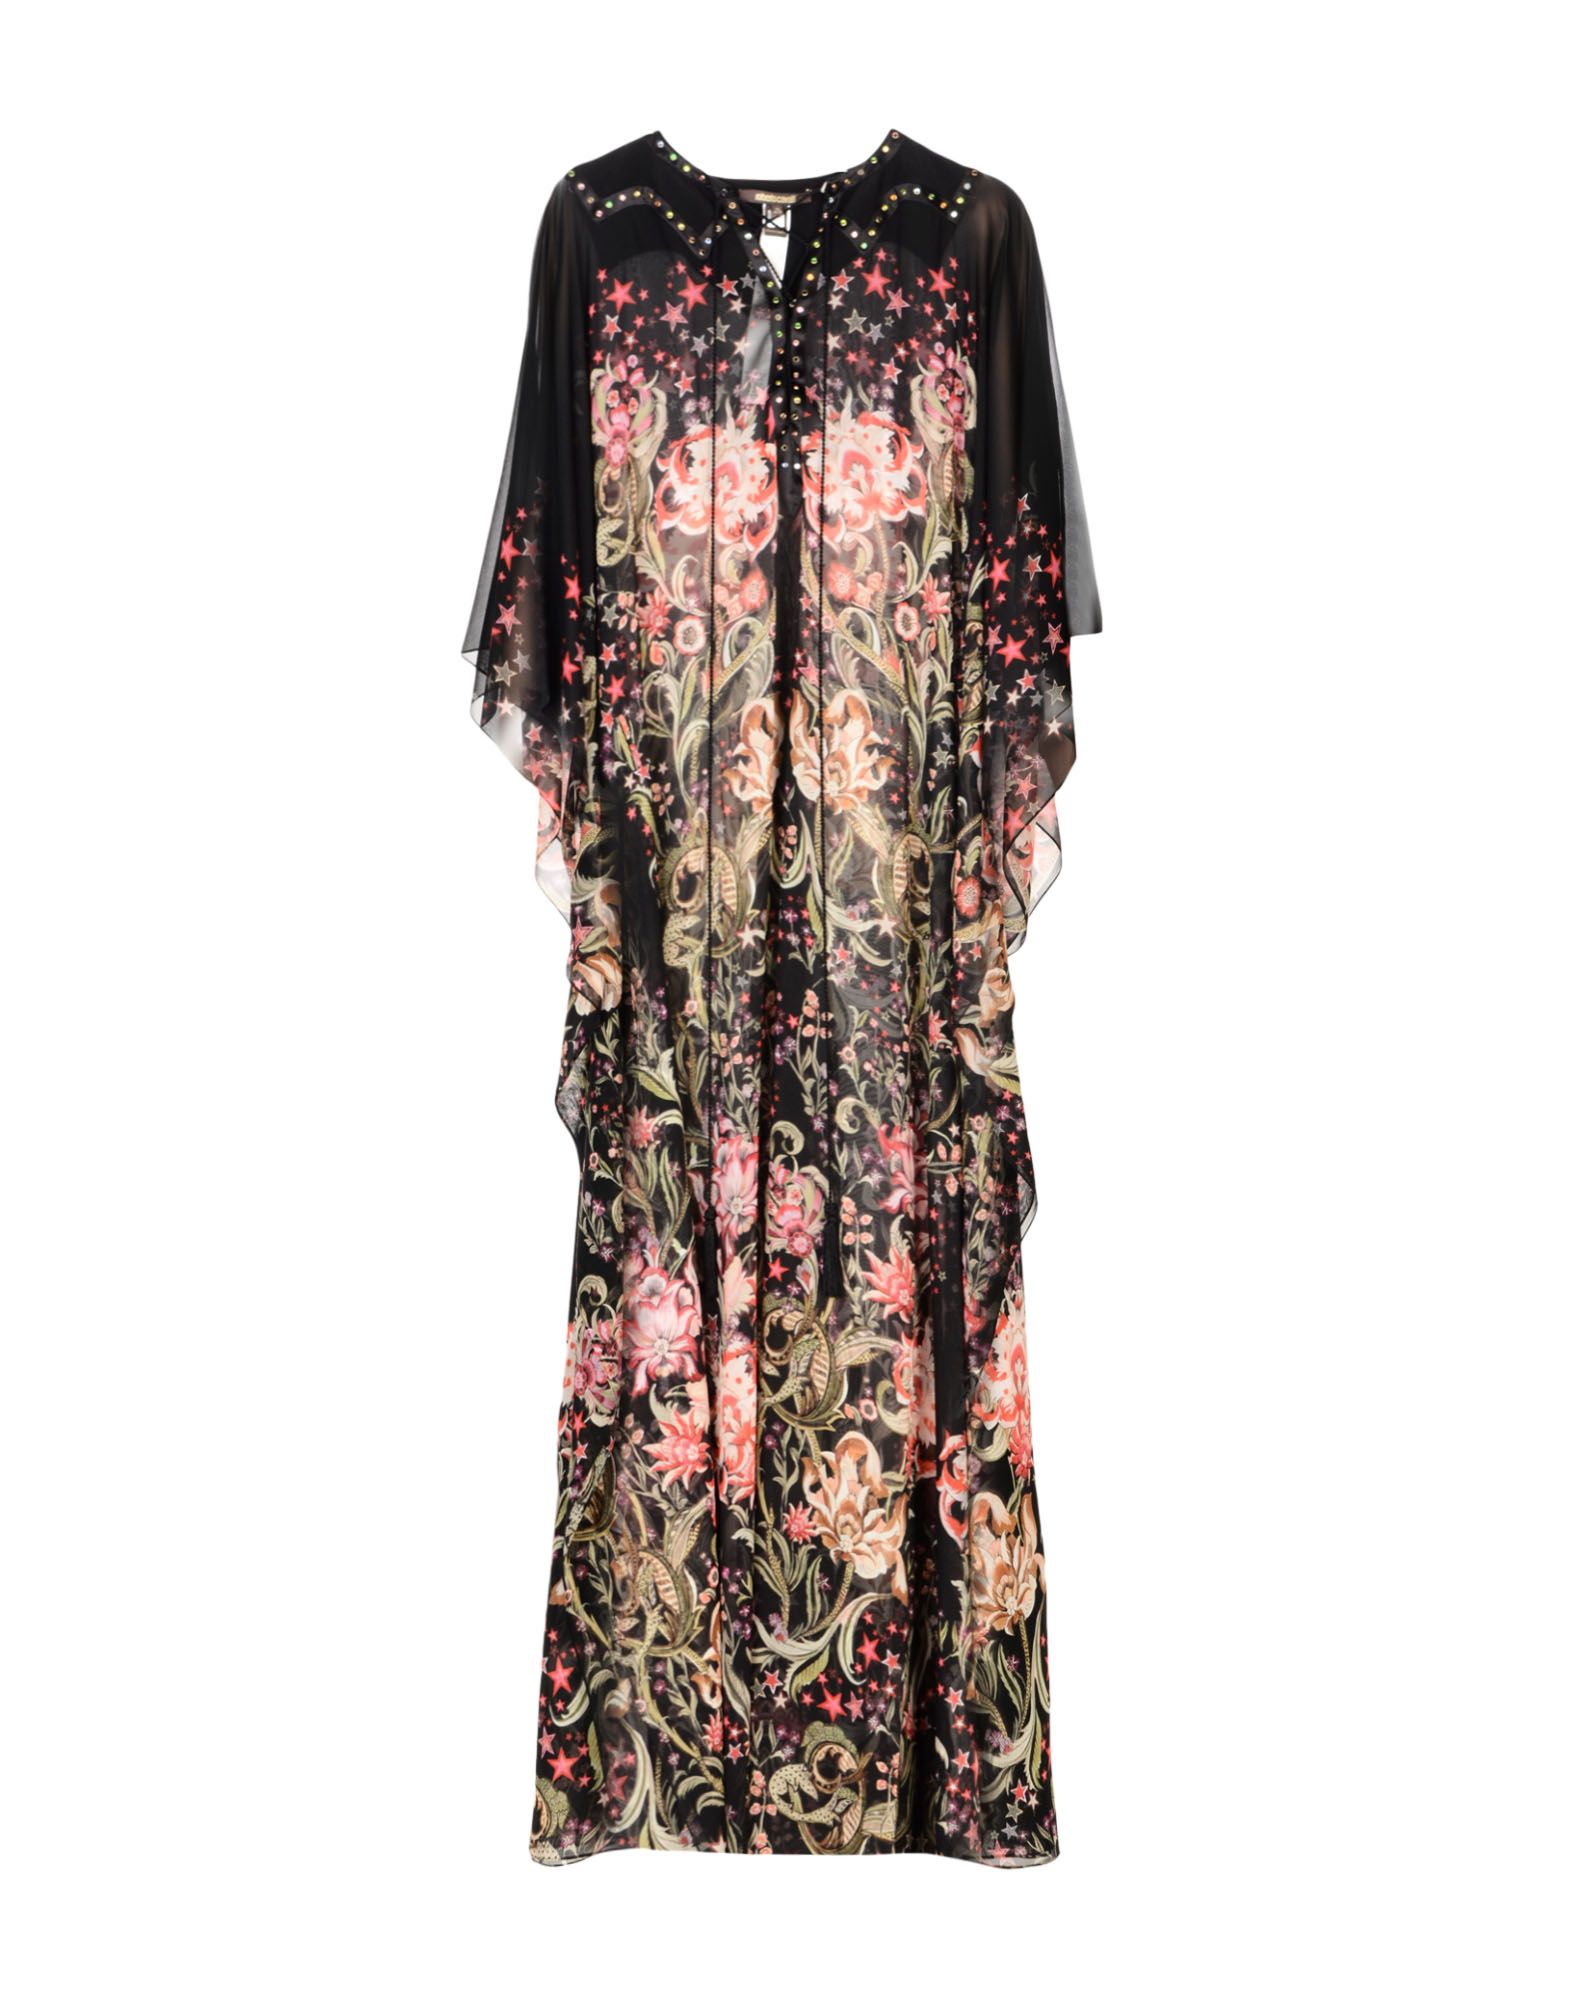 dressing gownRTO CAVALLI LONG DRESSES,34846371TO 3